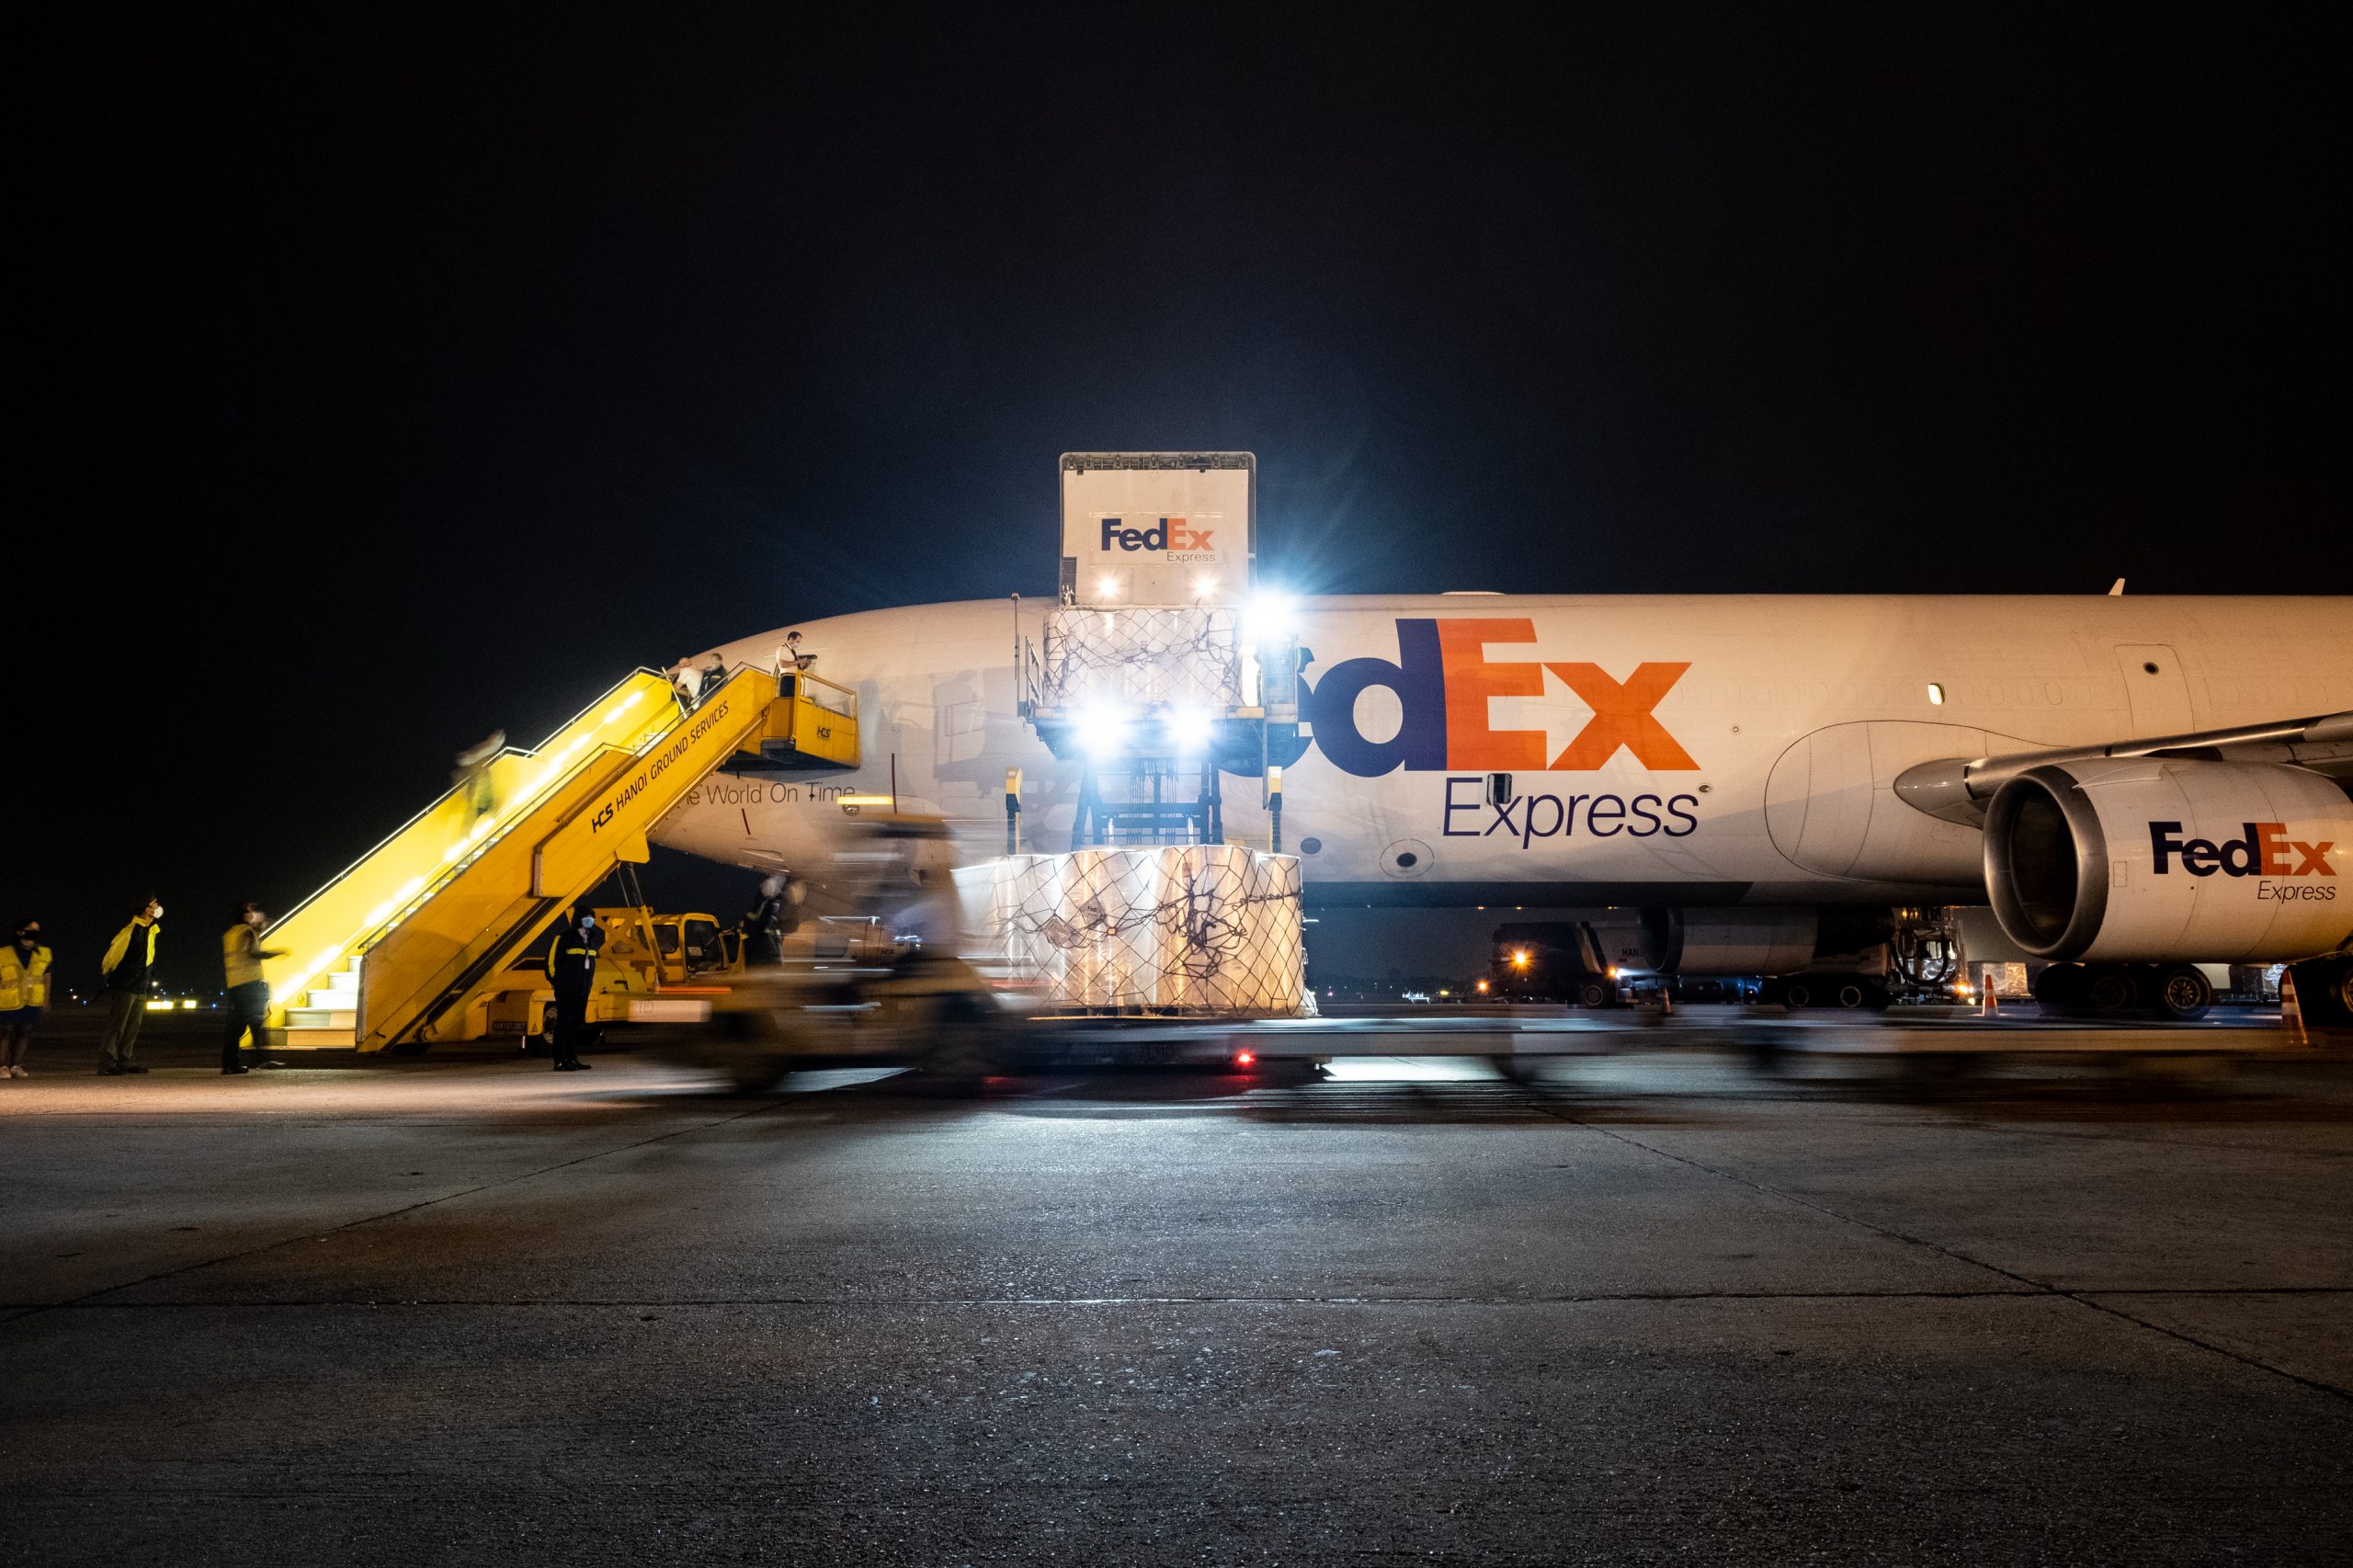 FedEx cuts European workforce as TNT takeover sees secondary hub role for Liege